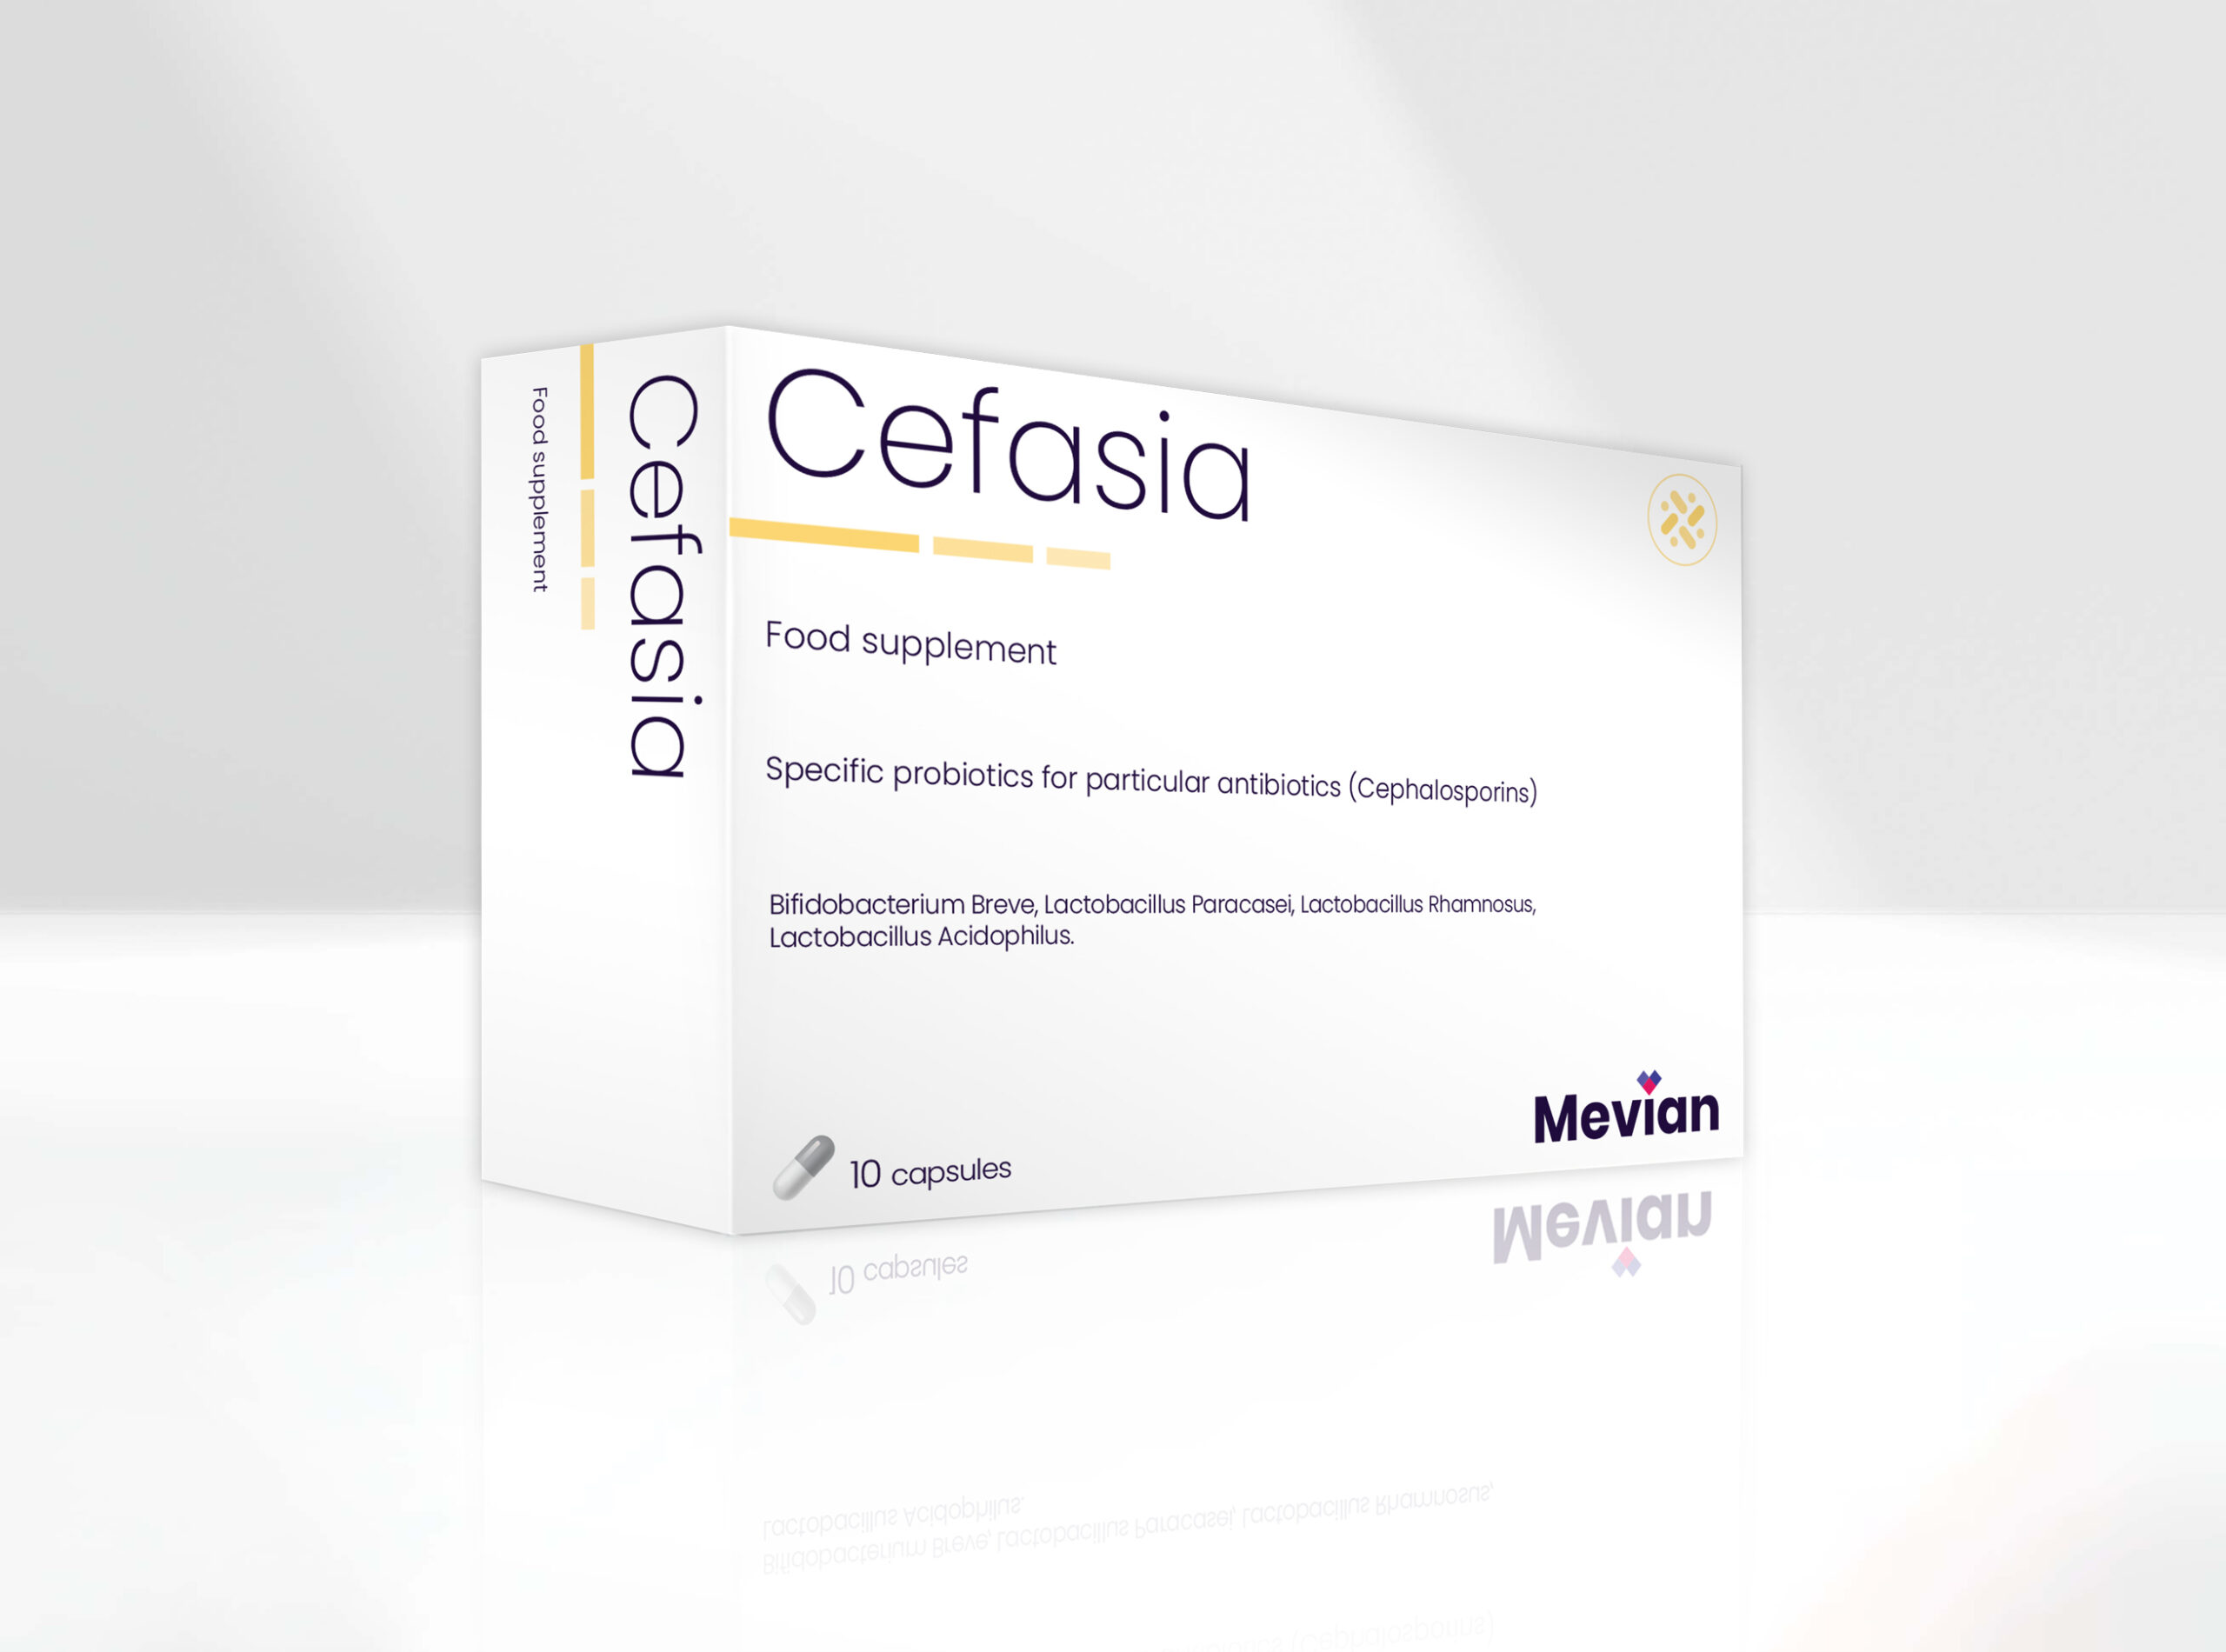 Cefasia is a novel approach in Antibiotic-Associated Side Effects (Diarrhoea, other, etc.) with strains selected for a particular group of antibiotics (Cephalosporins) based on probiotic strains' sensitivity to antibiotic activity.